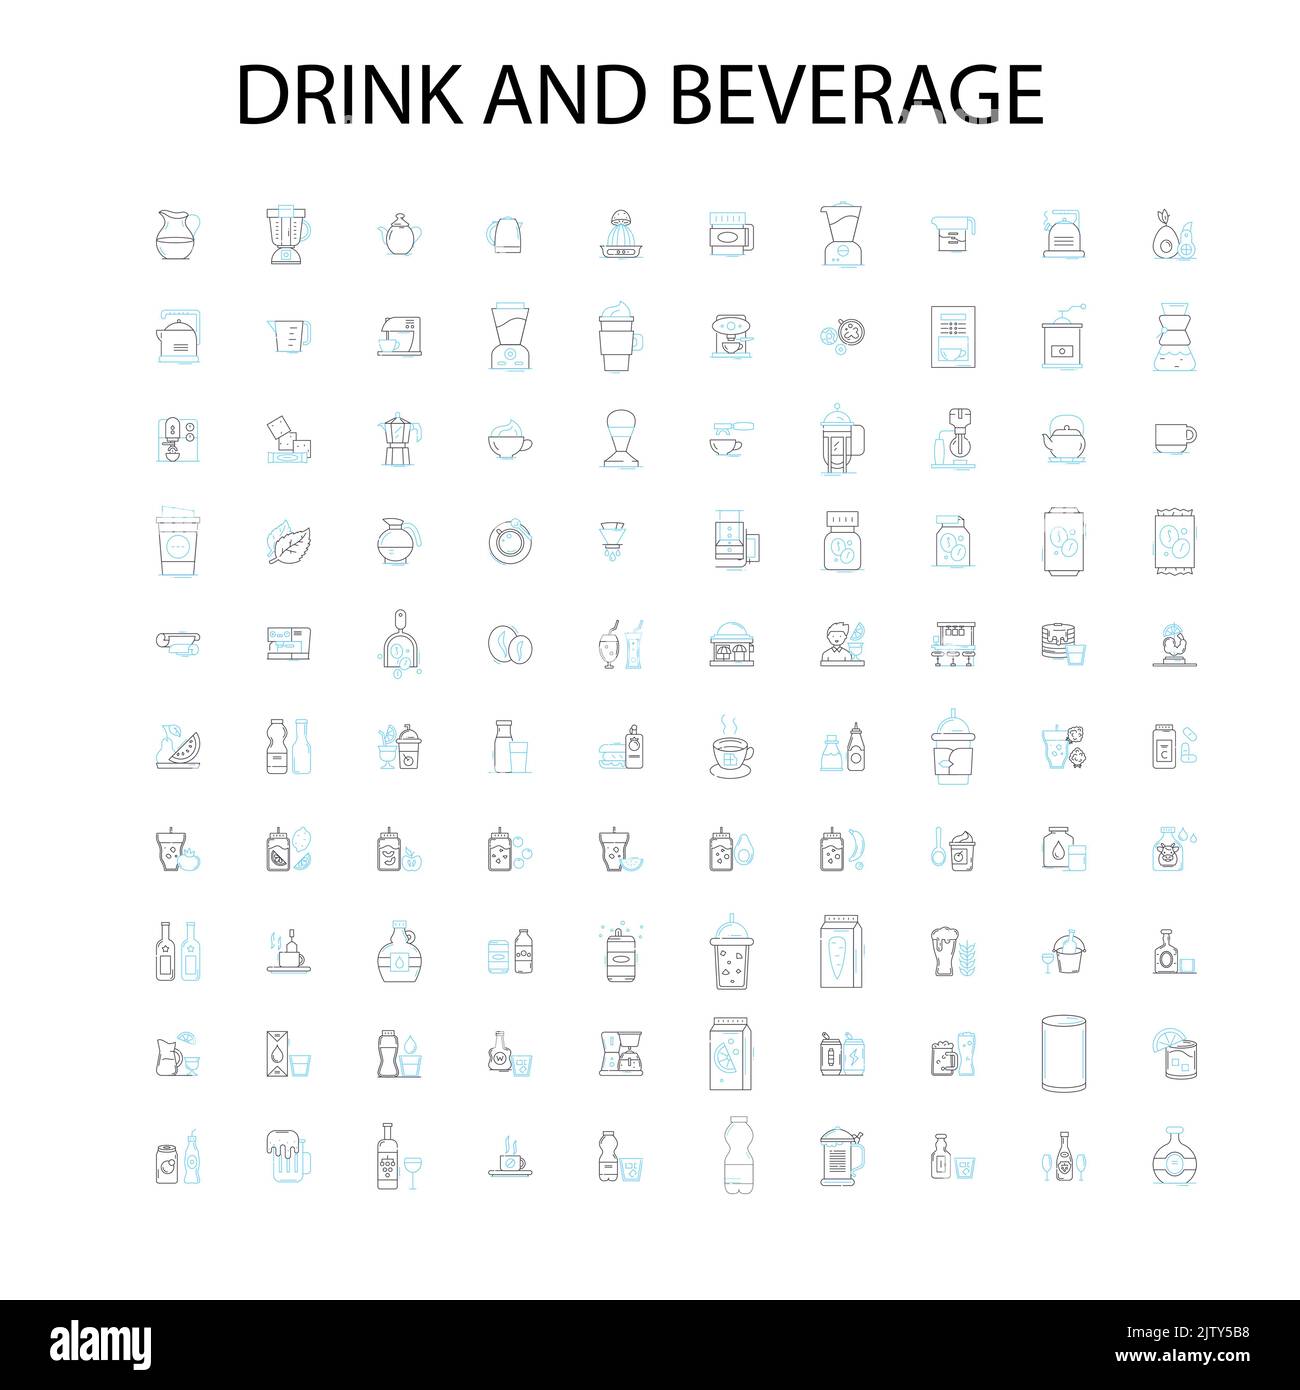 drink and beverage icons, signs, outline symbols, concept linear illustration line collection Stock Vector